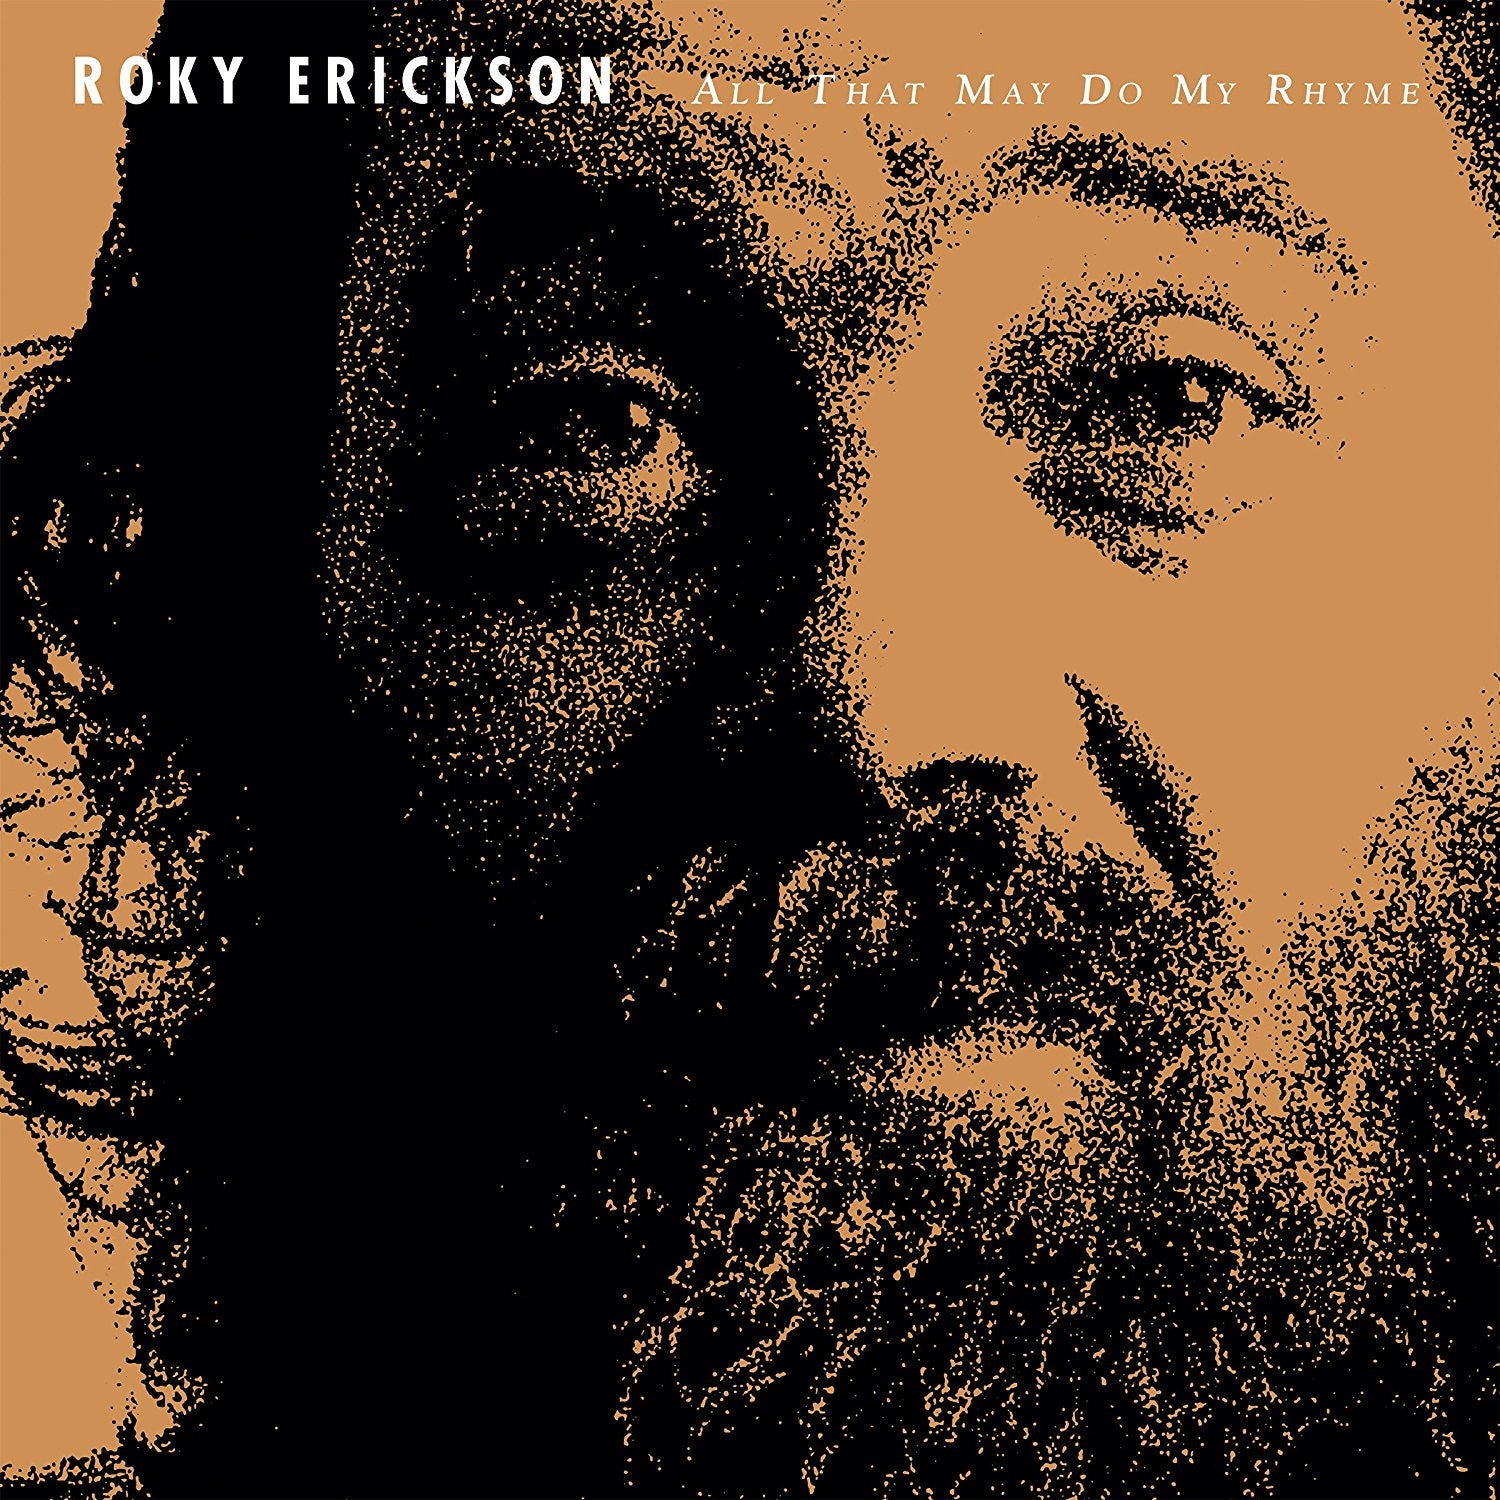 Roky Erickson - All That May Do My Rhyme CD